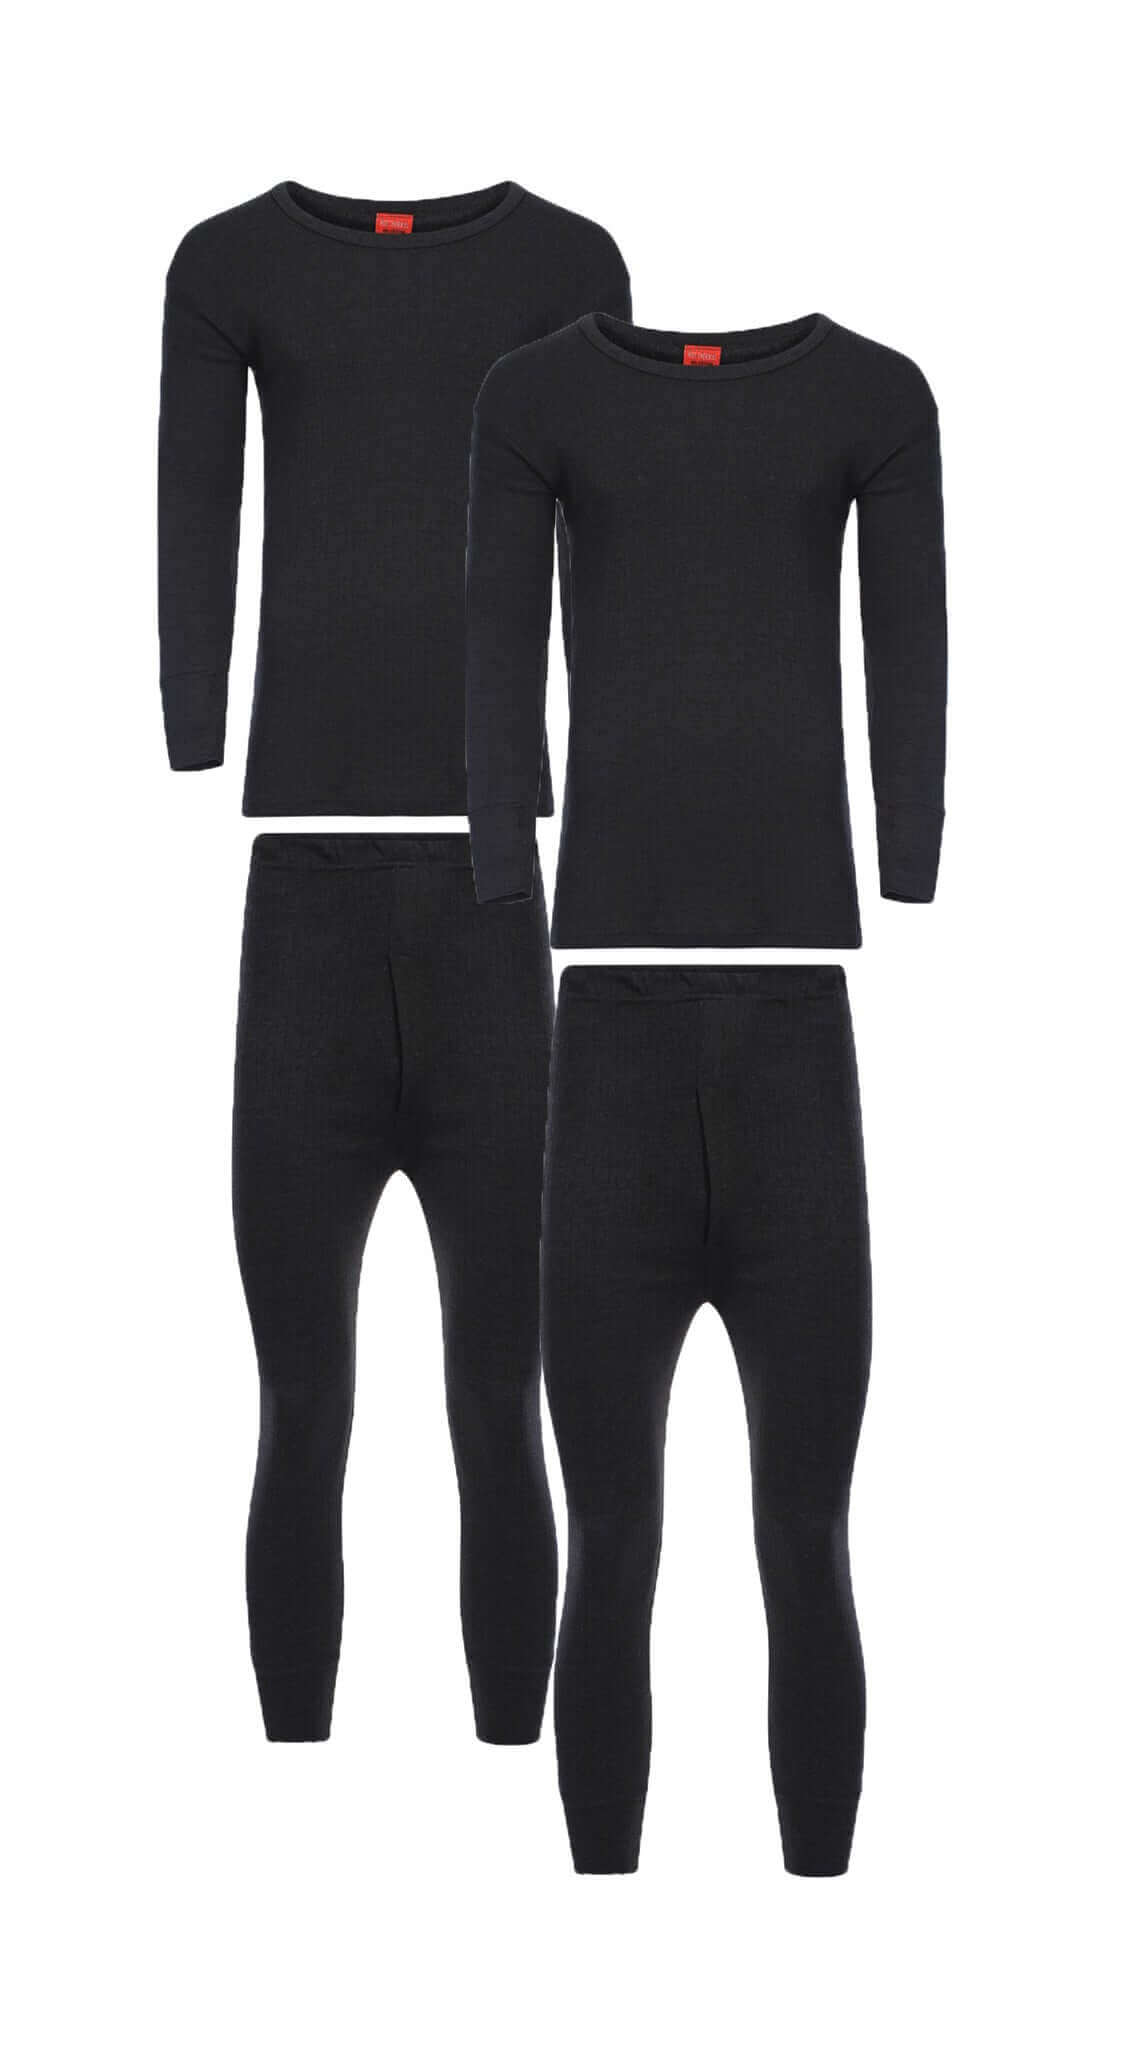 Buy Mens Thermal Underwear Set, Fleece Long Johns for Men Extreme Cold  Winter, Waffle Black Set, X-Large at